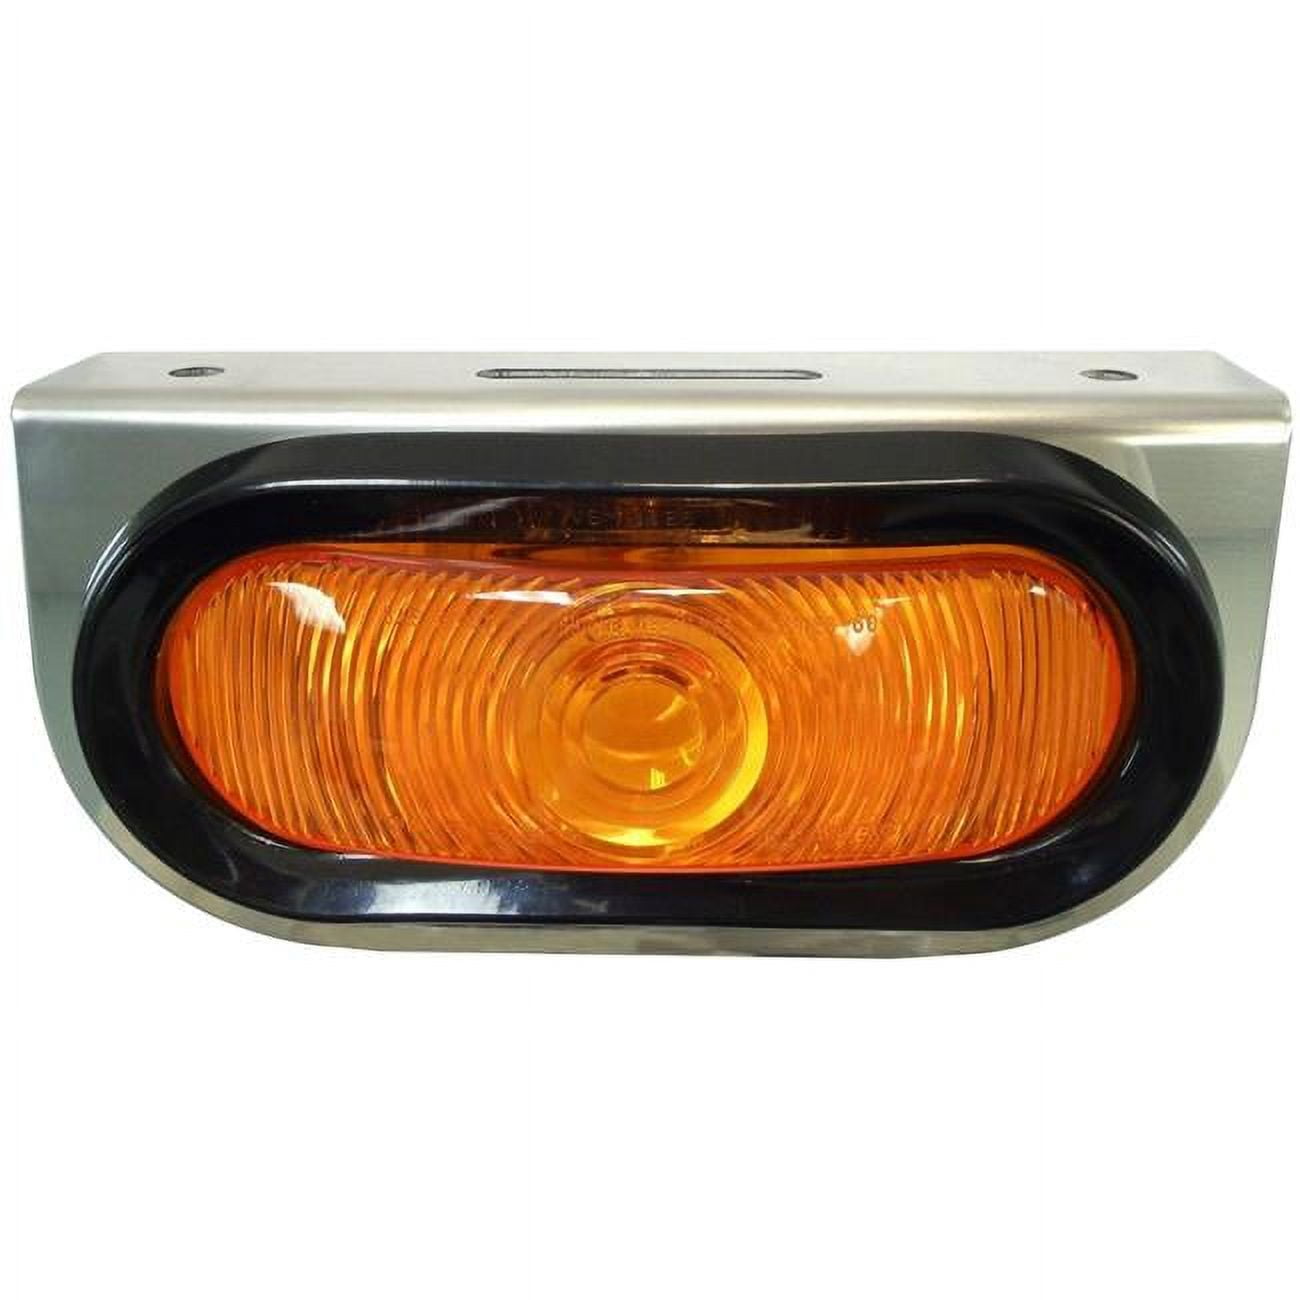 04820402 6.5 In. Ss Mount With Oval Amber Light & Wiring Harness